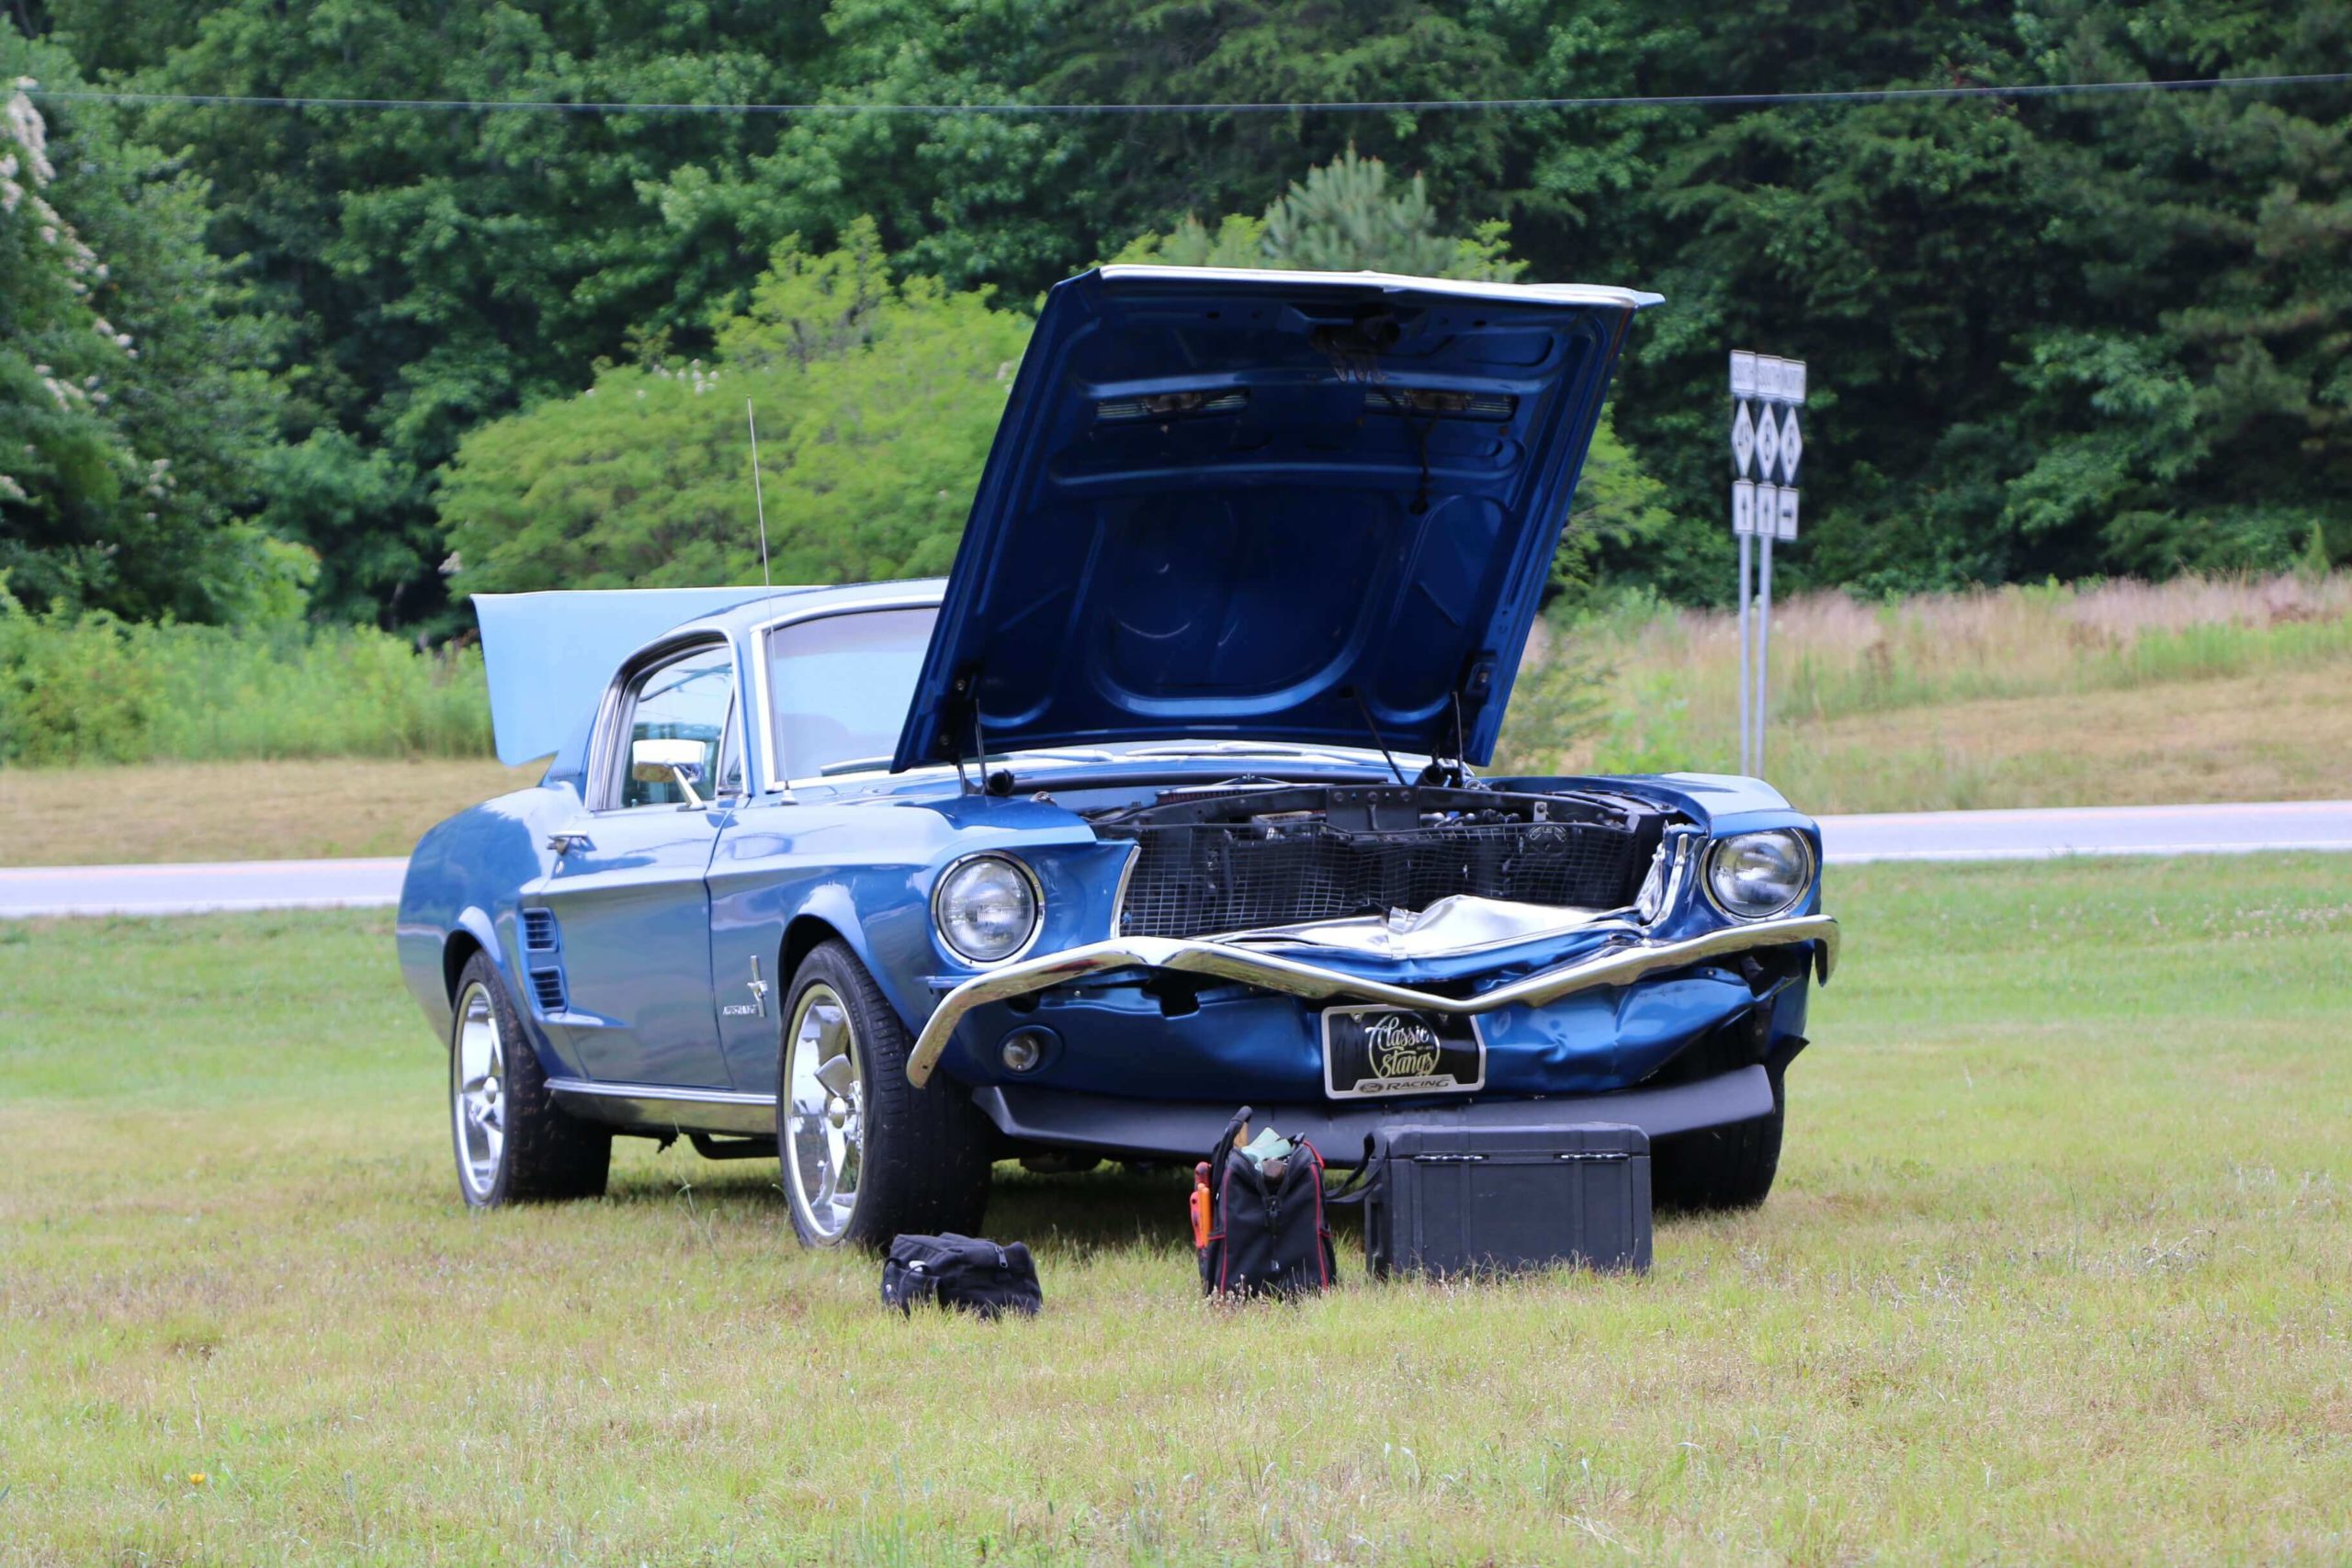 Hot Rod Power Tour '67 Mustang Fastback